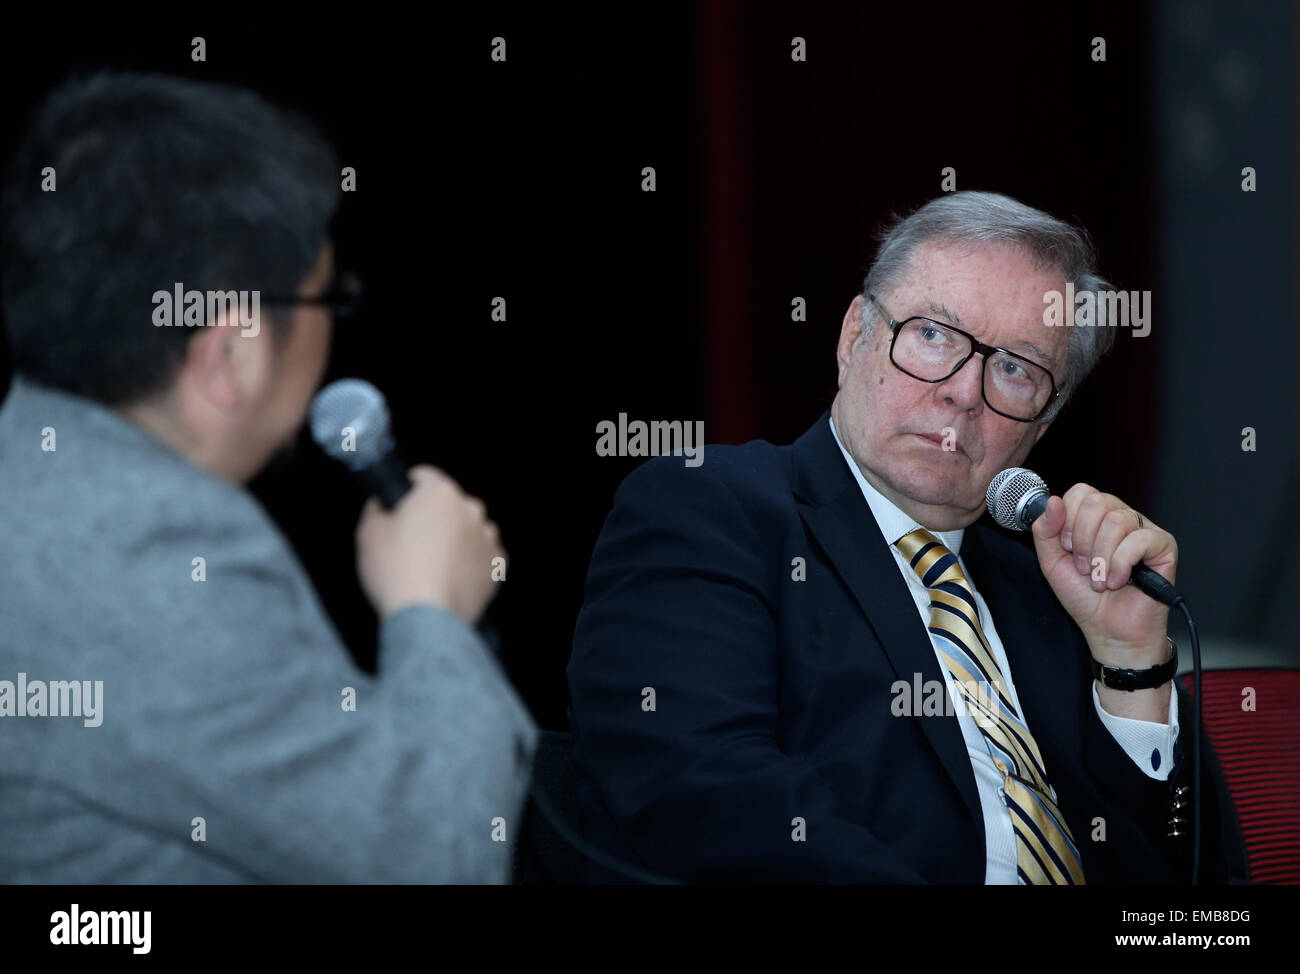 Beijing, China. 19th Apr, 2015. Polish director Krzysztof Zanussi (R) attends the opening ceremony of the Polish movie panorama during the fifth Beijing International Film Festival (BJIFF) in Beijing, capital of China, April 19, 2015. The opening film of Sunday's Polish movie panorama was Zanussi's 1980 film the Constant Factor. © Gao Jing/Xinhua/Alamy Live News Stock Photo